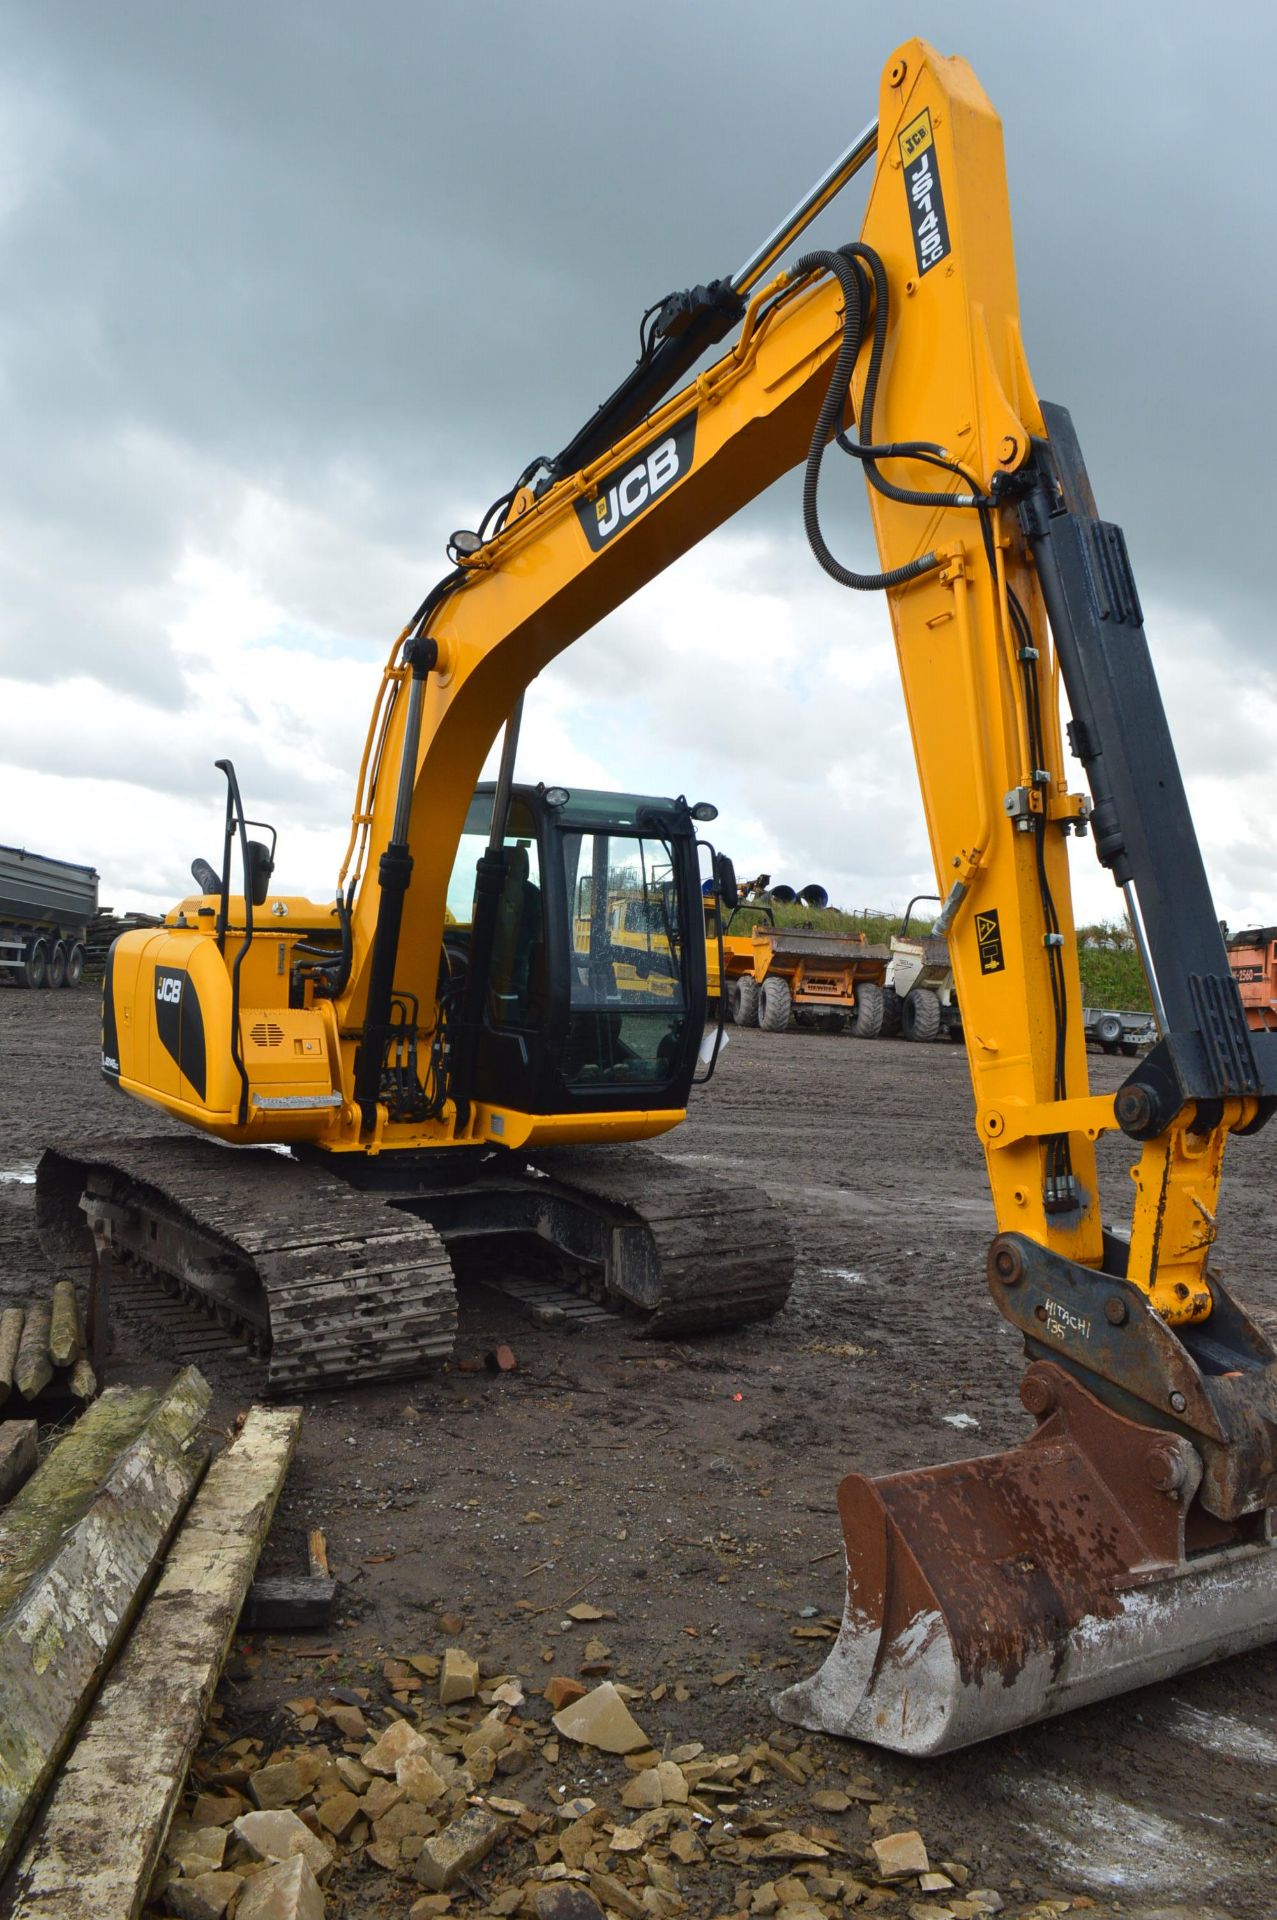 JCB JS145LC T4i TRACKED EXCAVATOR, PIN JCBJS14EL02307616, year of manufacture 2015, indicated - Image 4 of 7